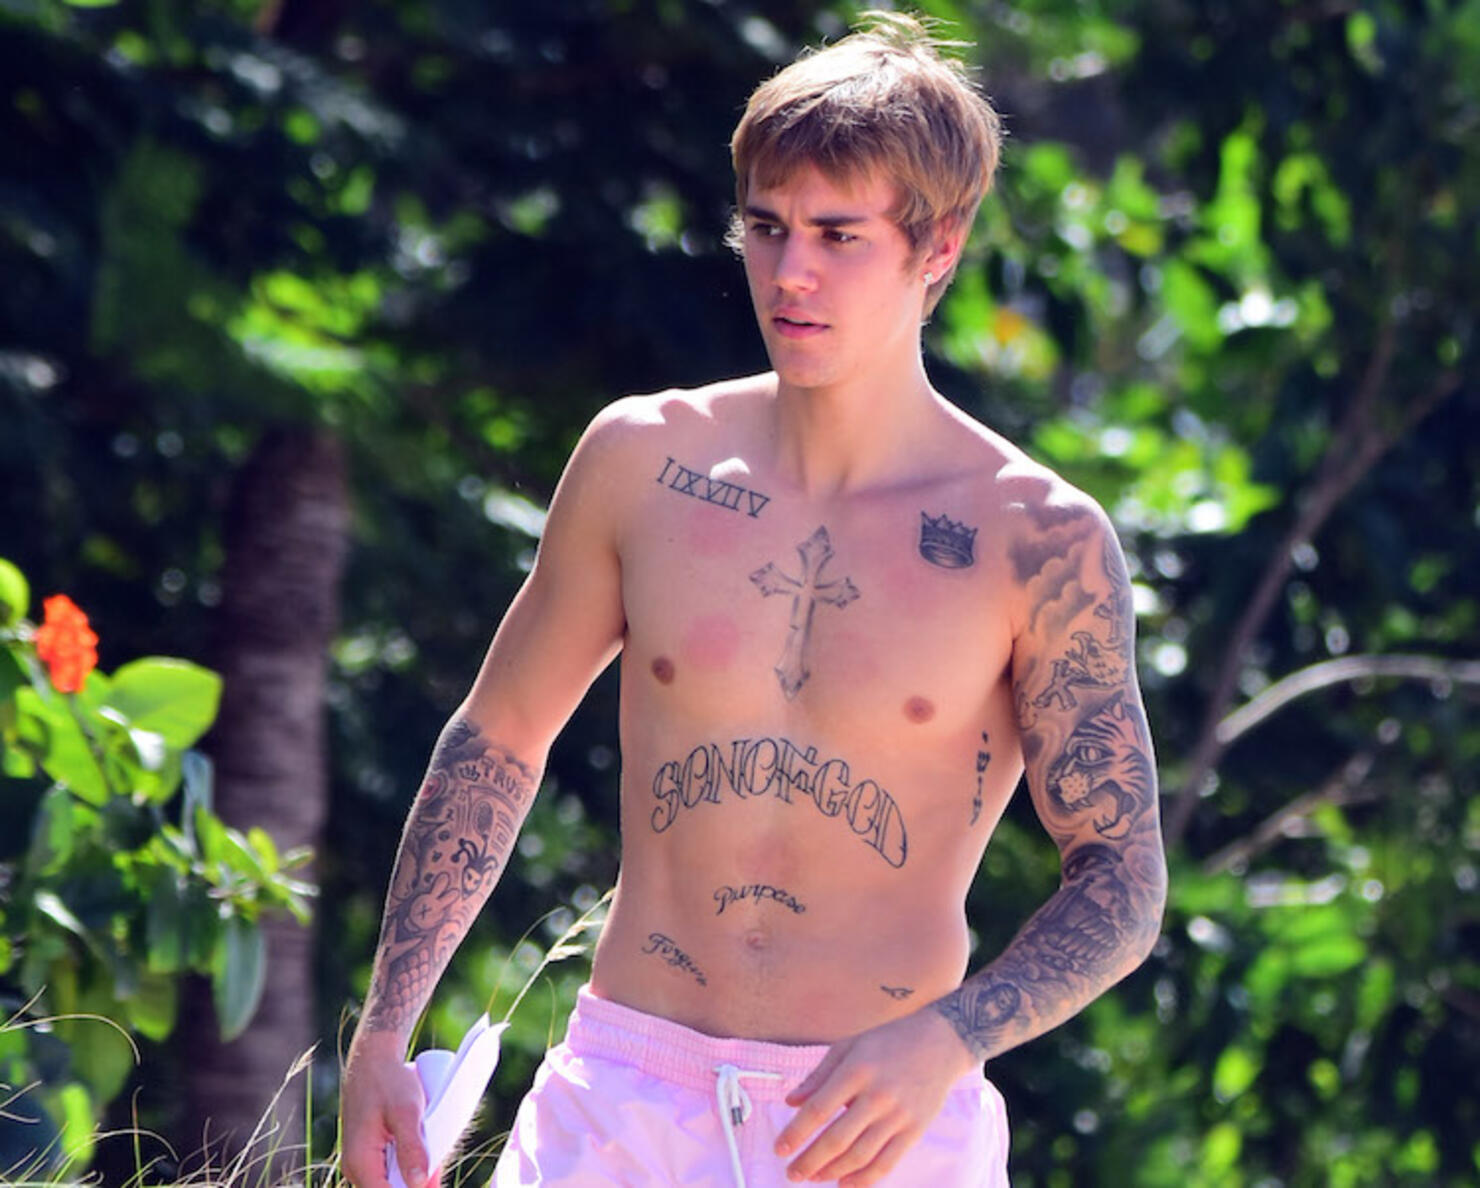 Shirtless Justin Bieber laps up the attention at the beach on Barbados getaway.